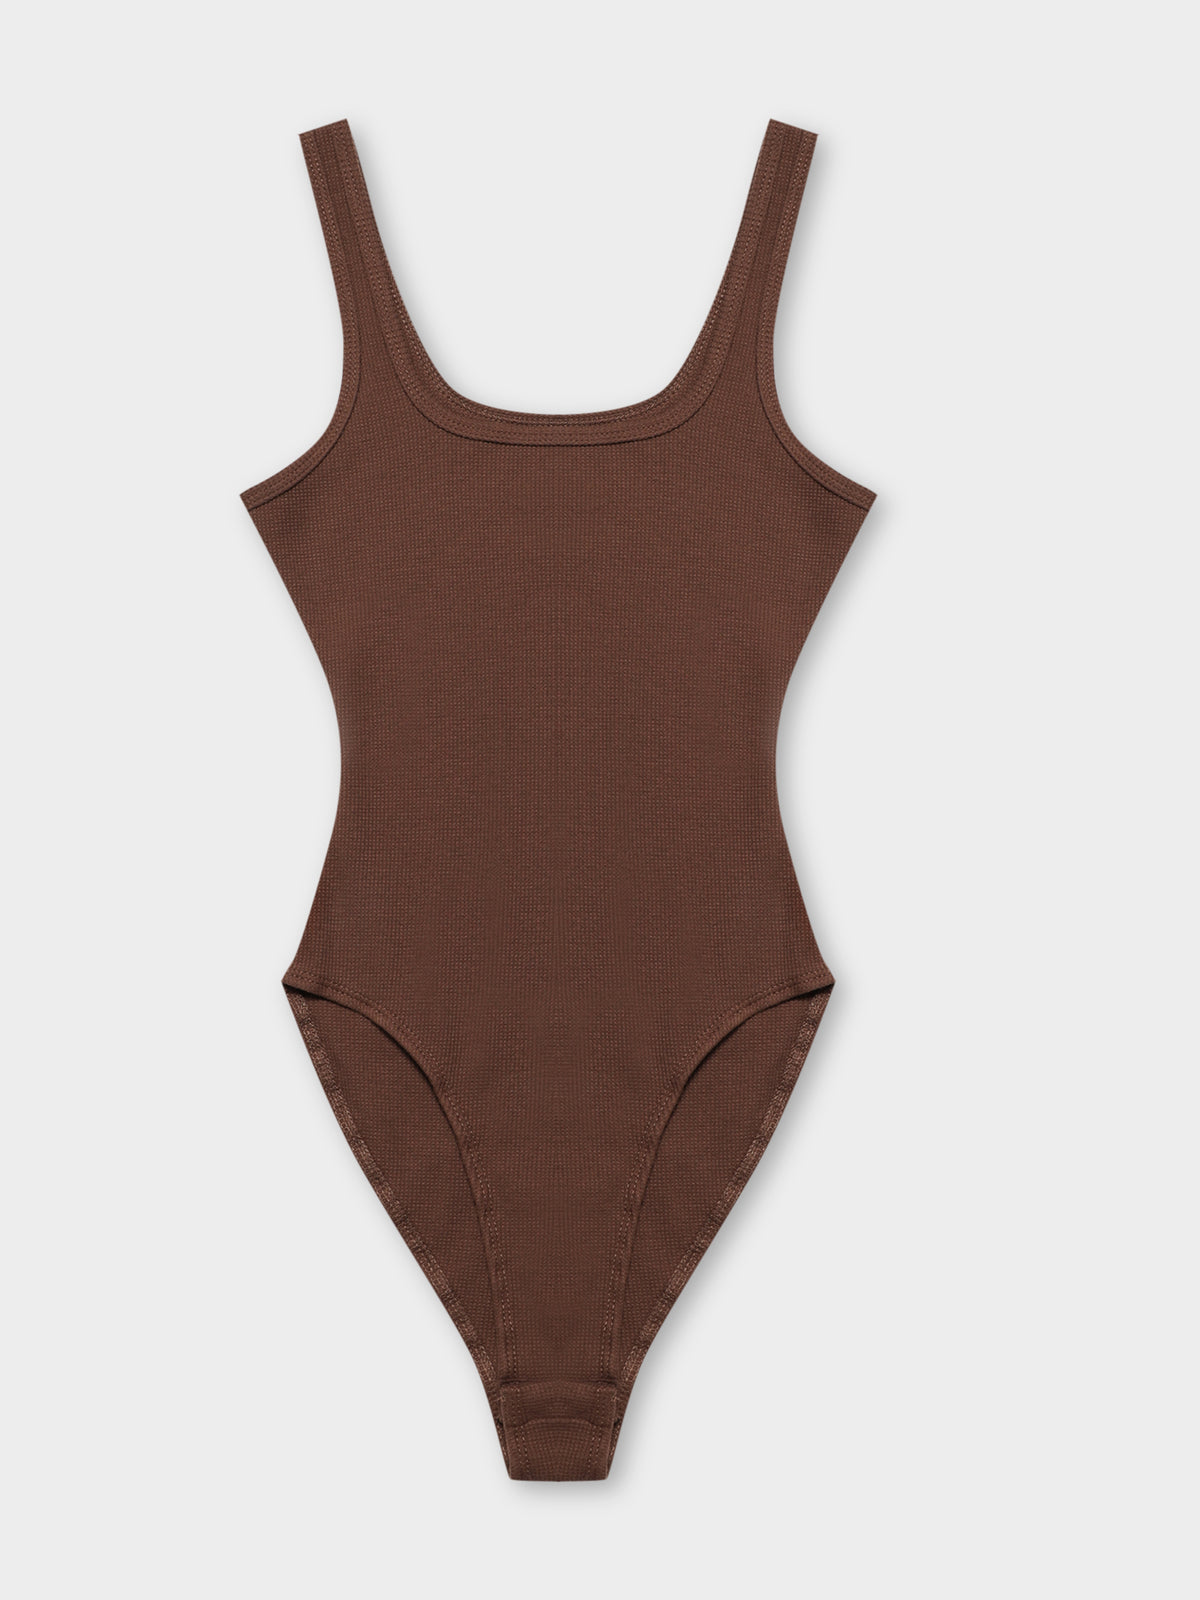 Dylan Waffle Bodysuit in Chocolate